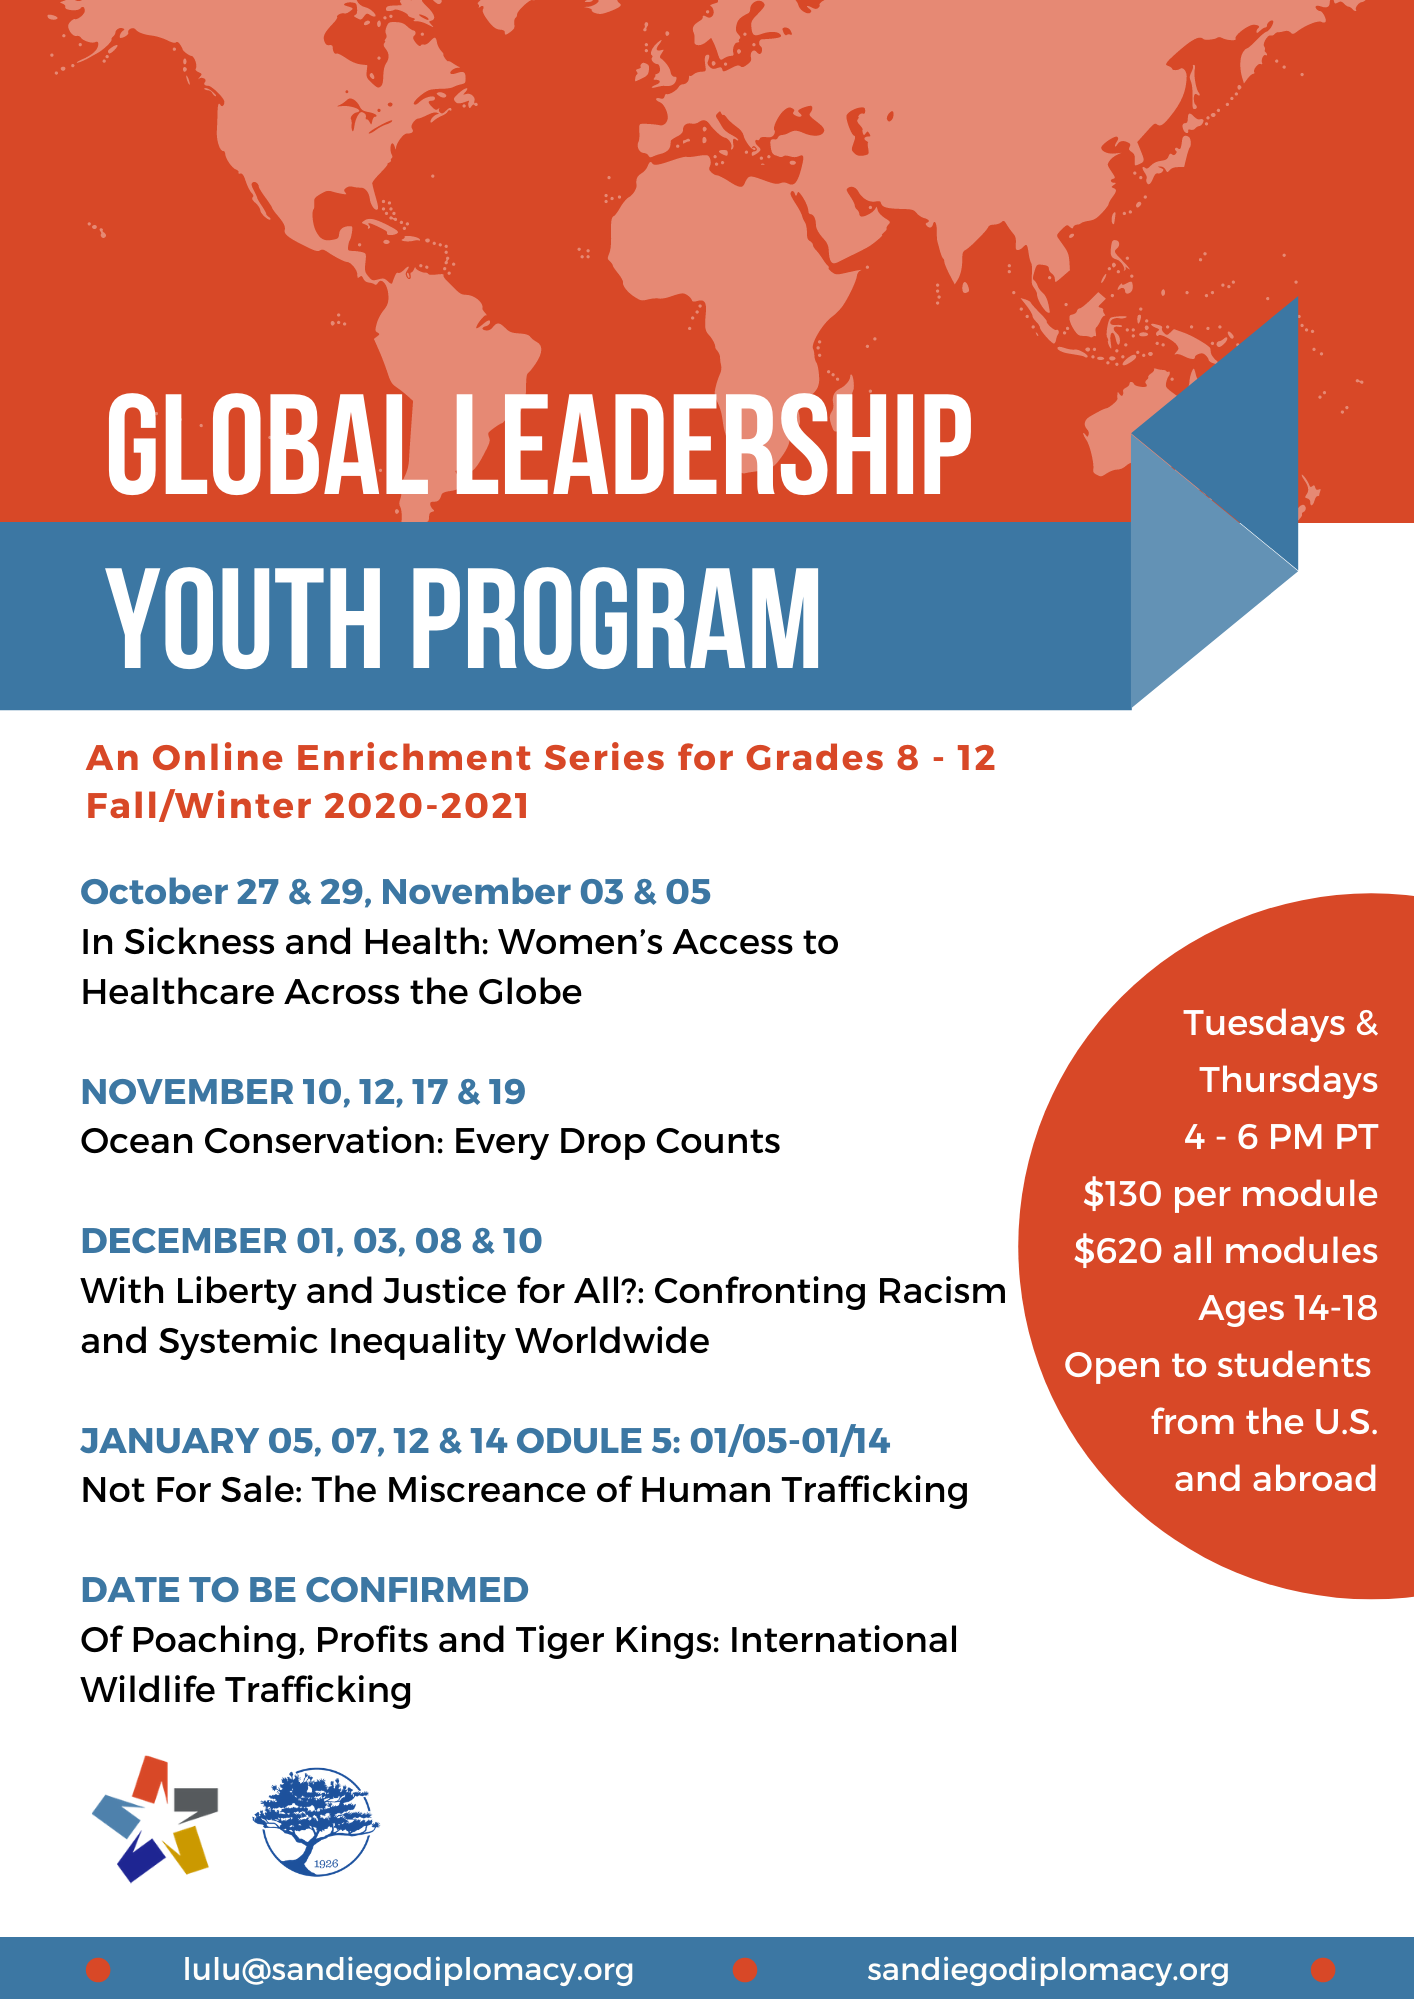 Details of the Global Leadership Youth Program